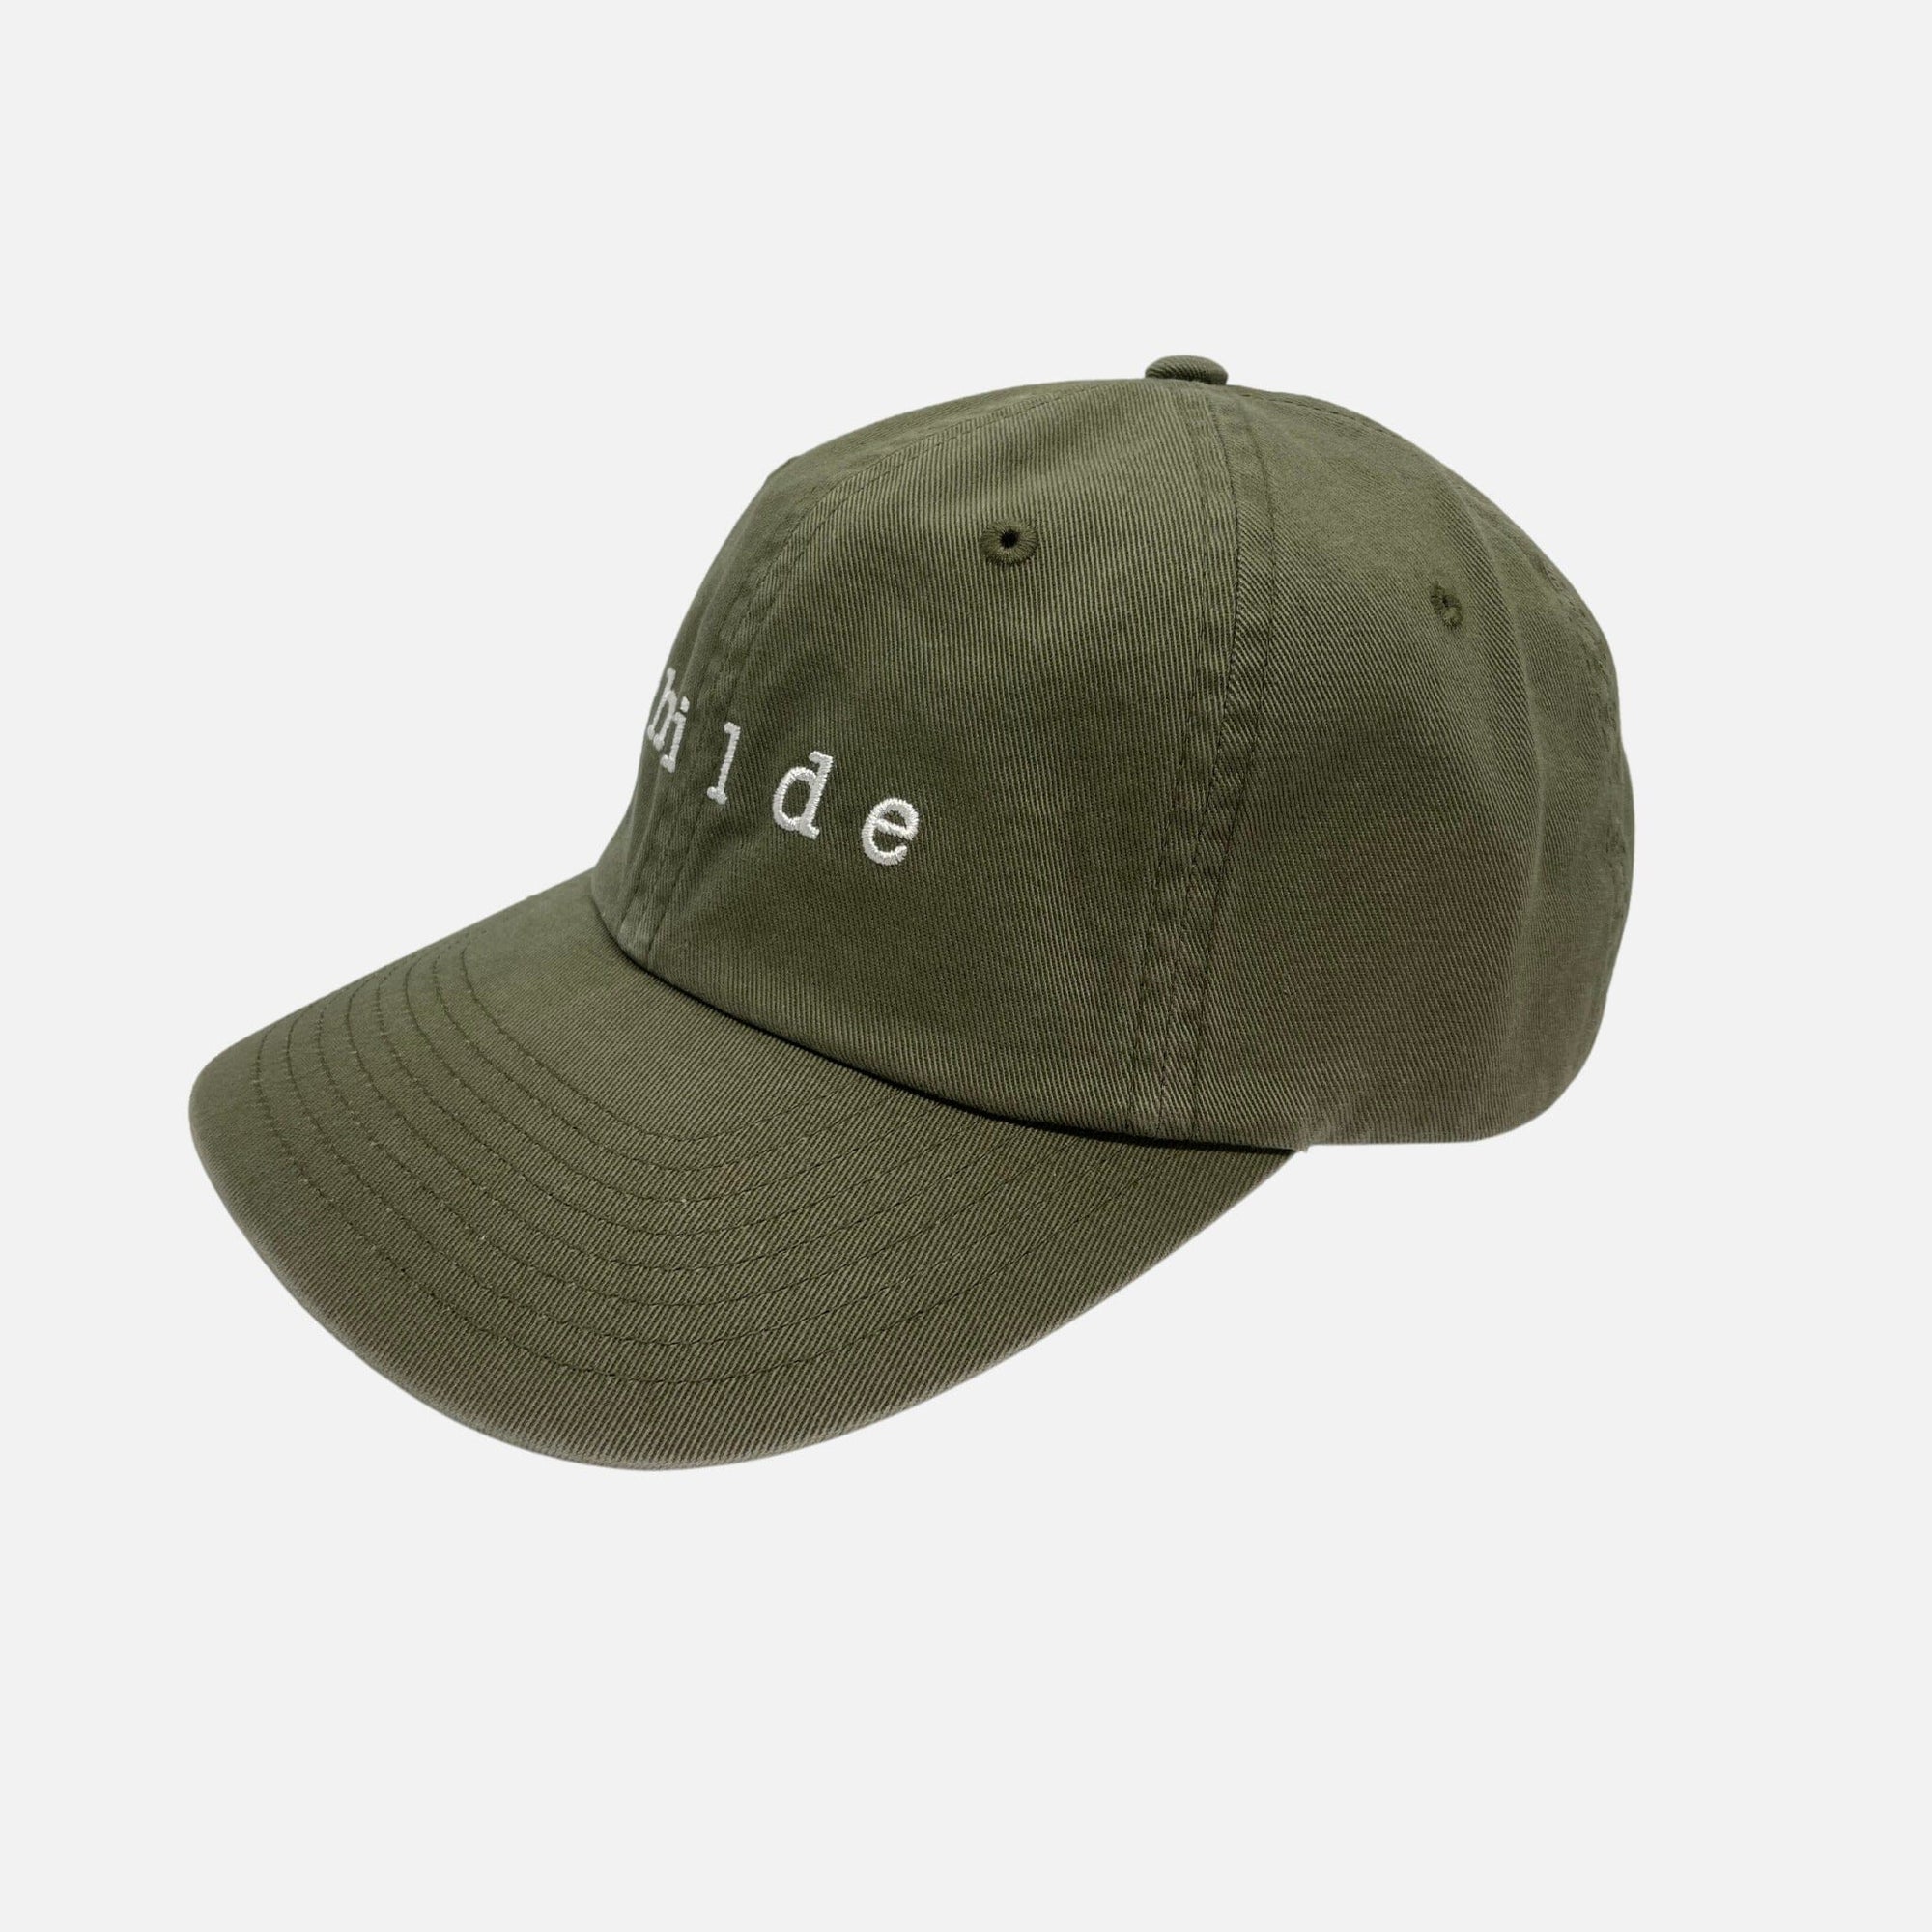 Childe Dad Cap - Pale Army Green